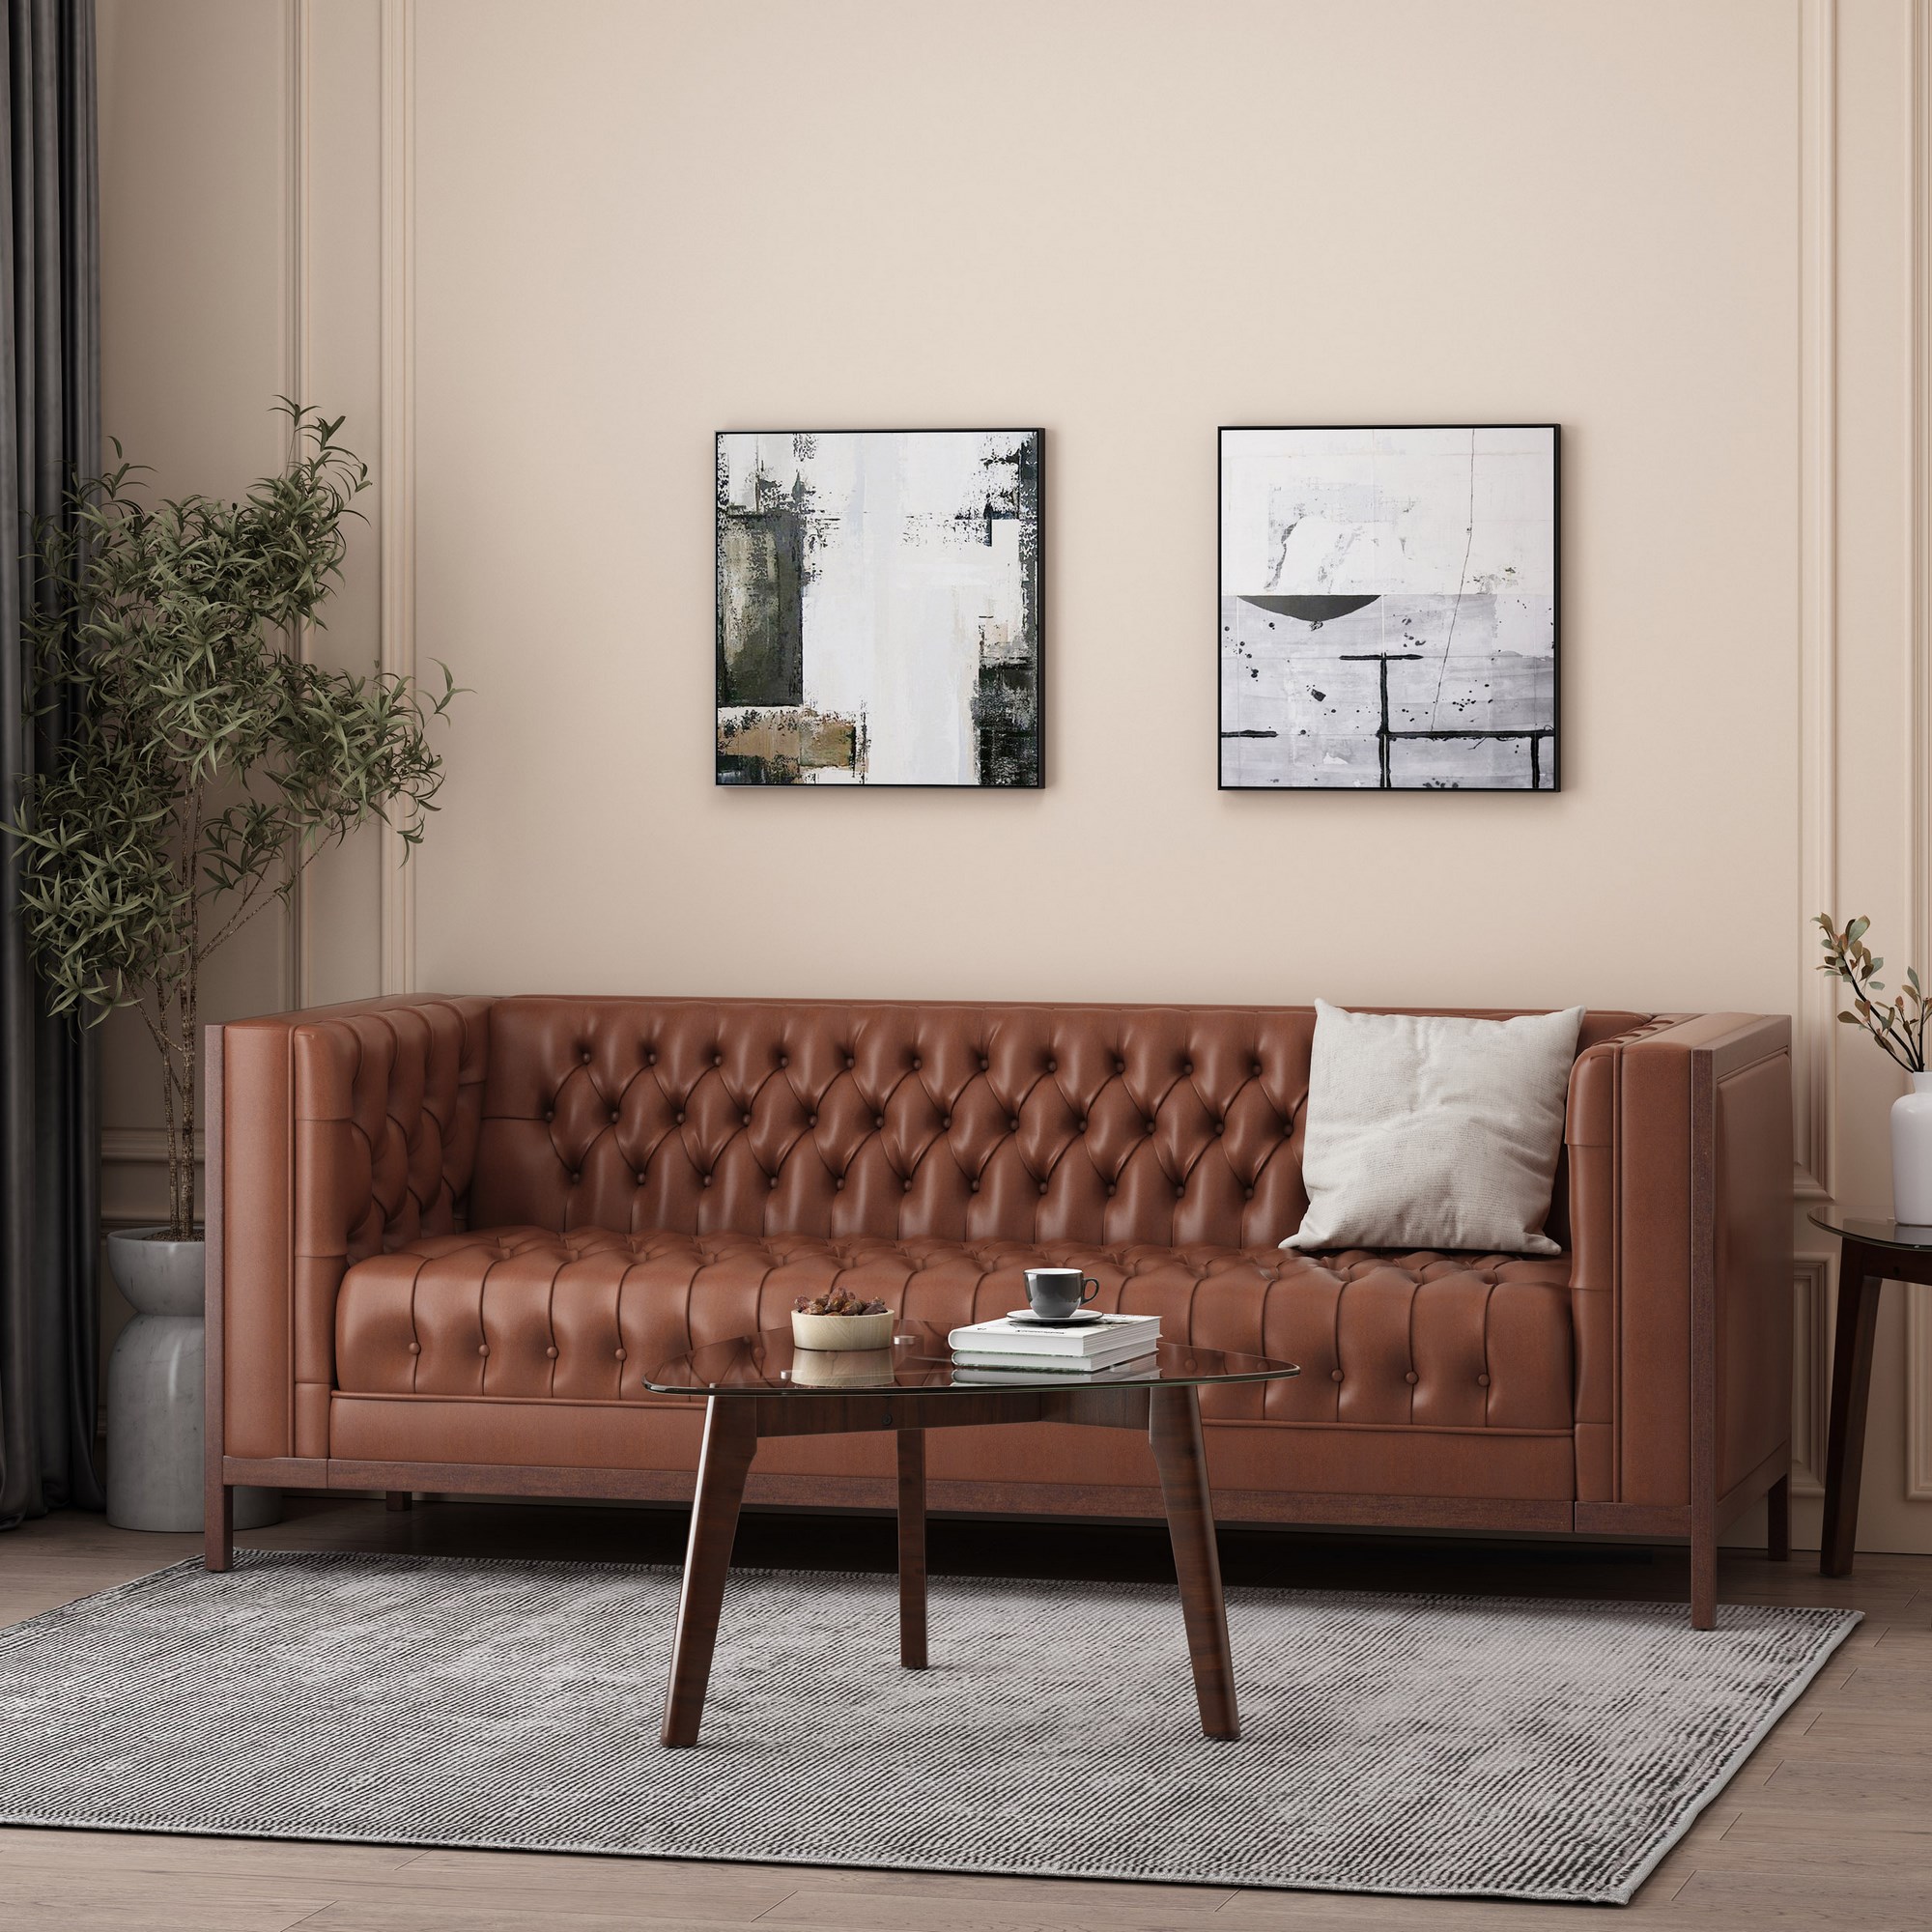 Petteti Contemporary Faux Leather Tufted 3 Seater Sofa, Cognac Brown ...